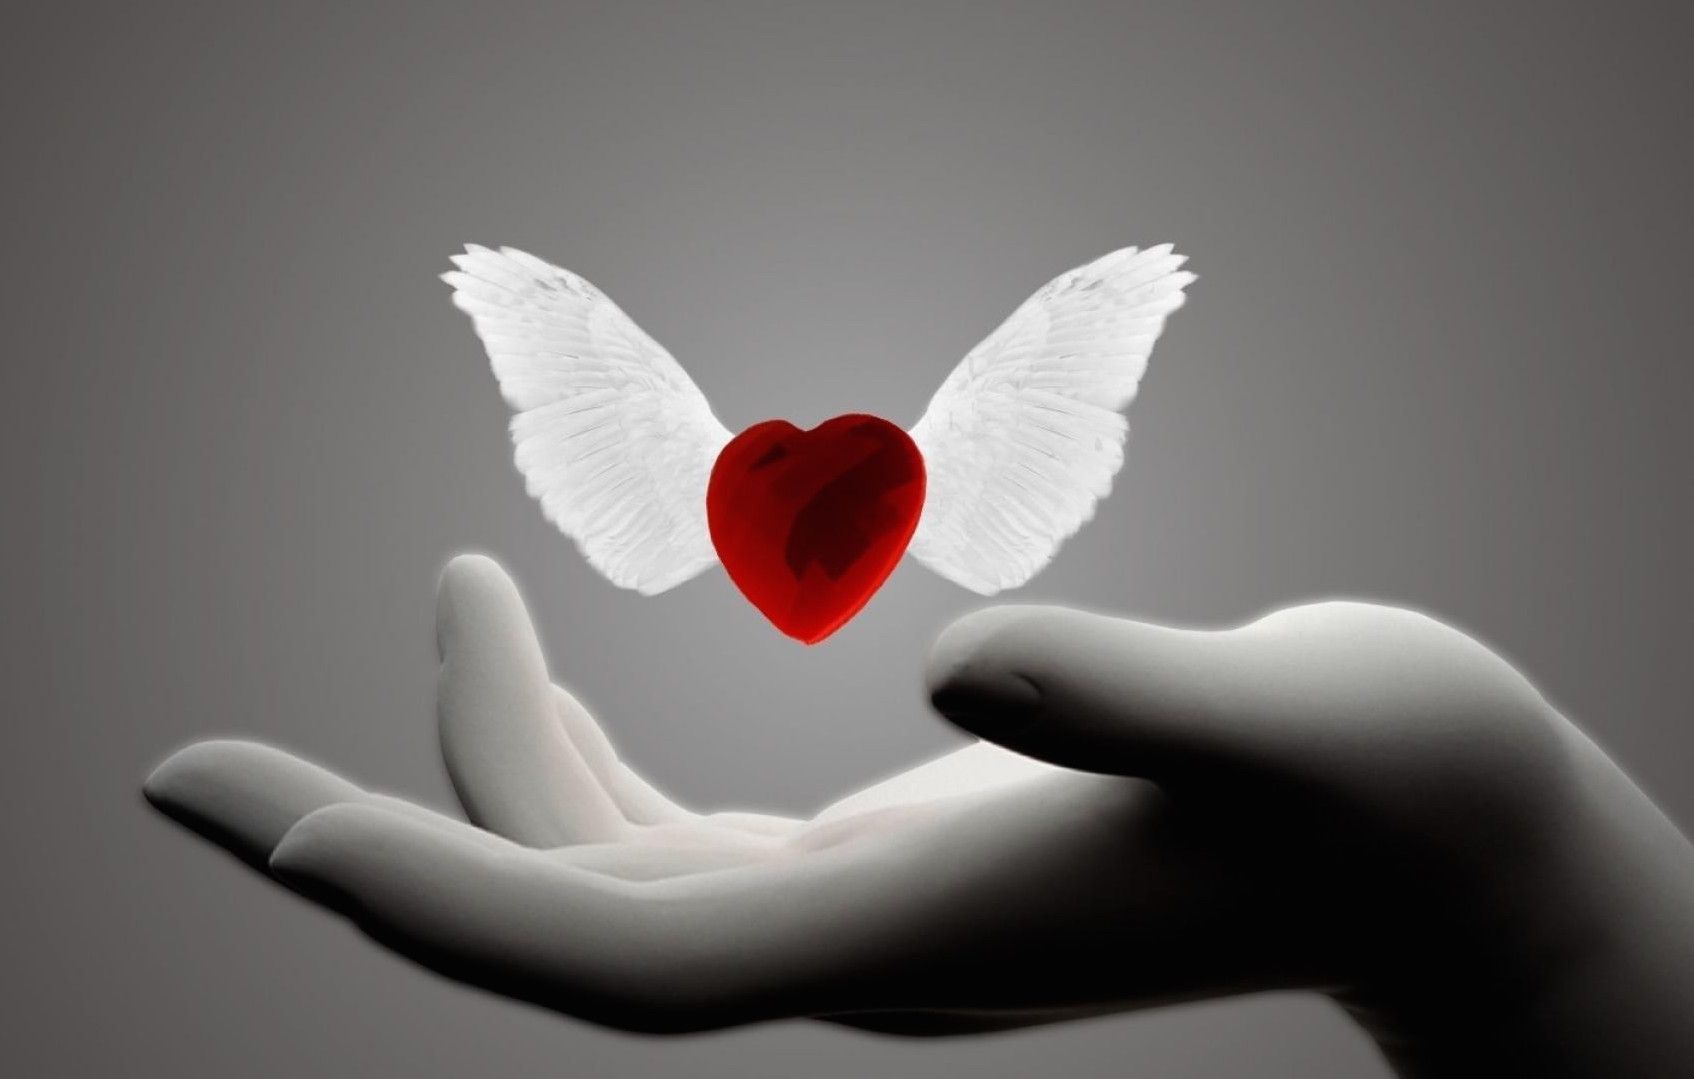 Heart with Wings Wallpaper Free Heart with Wings Background